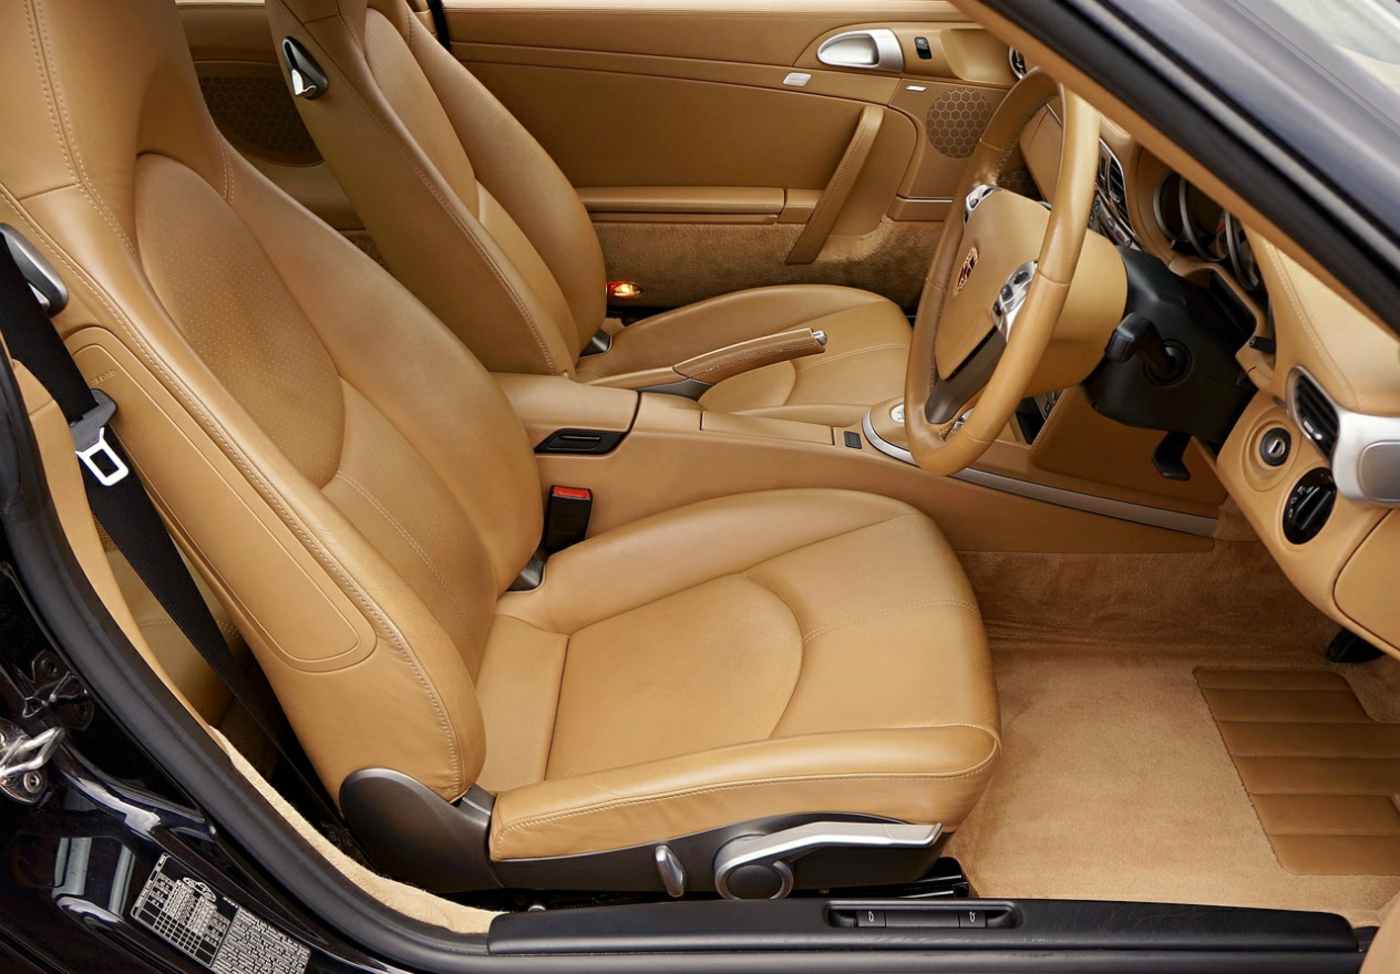 Tips for caring for car seats made of plain leather